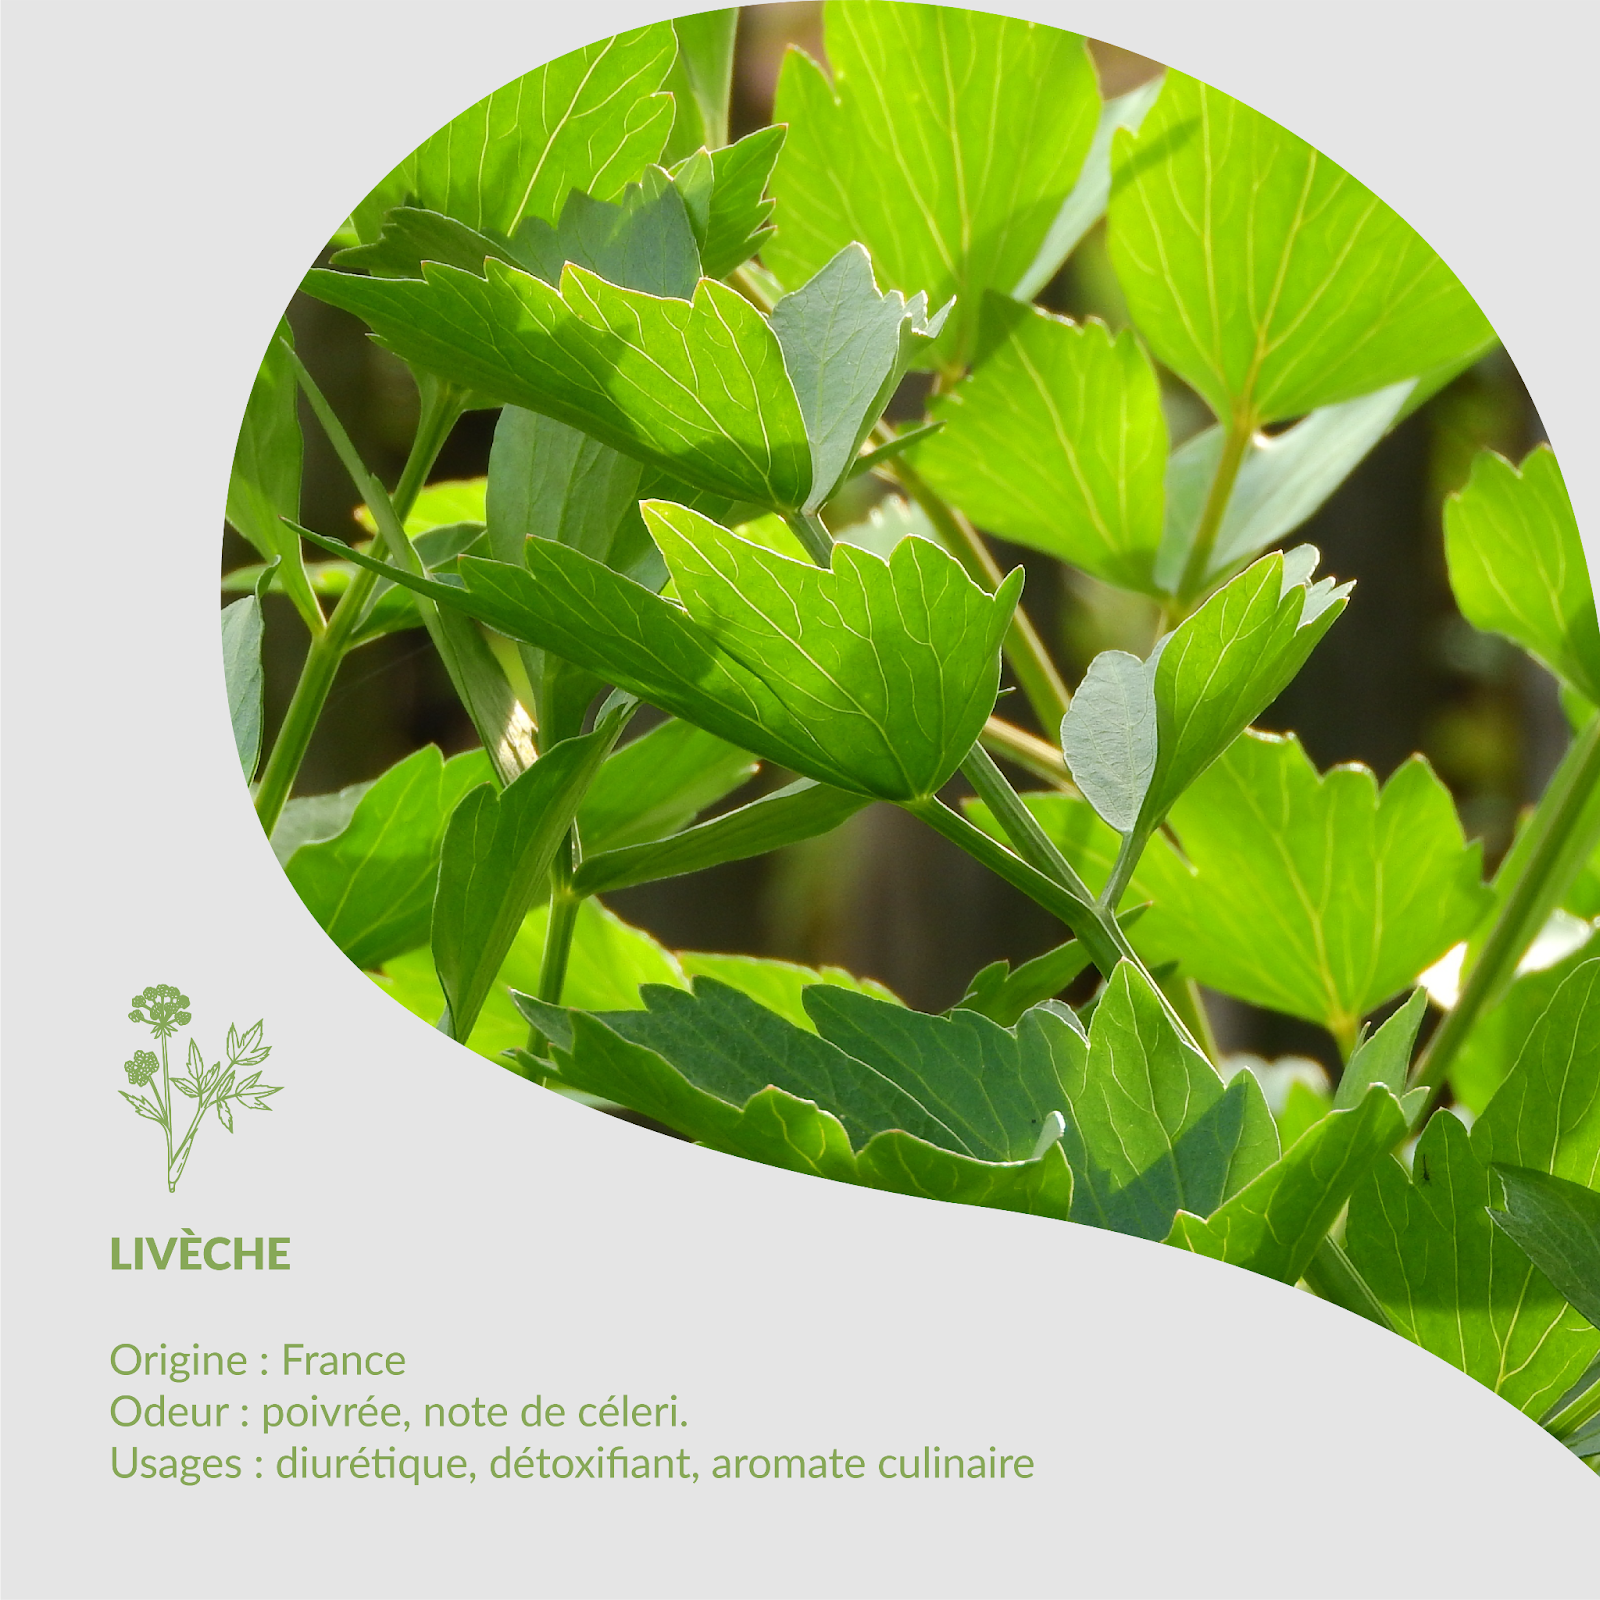 Plant of the Month: Lovage